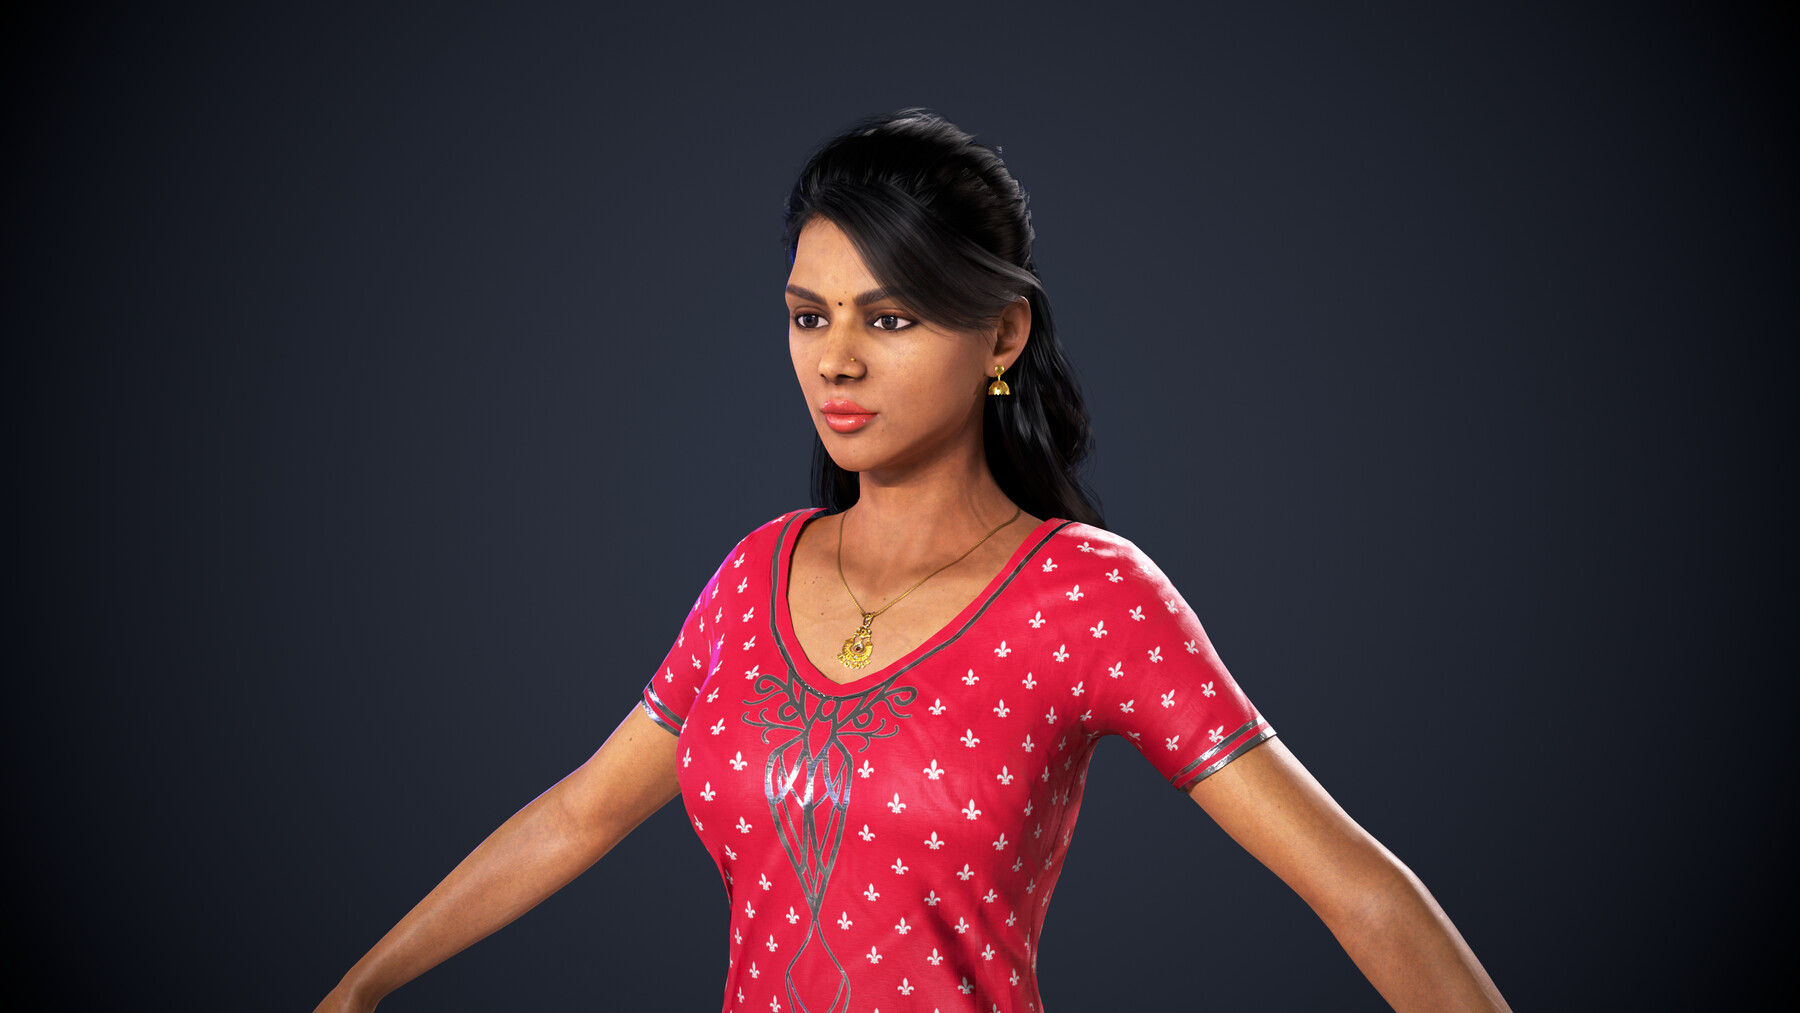 ArtStation - Indian Girl Rigged Low poly | Game Assets